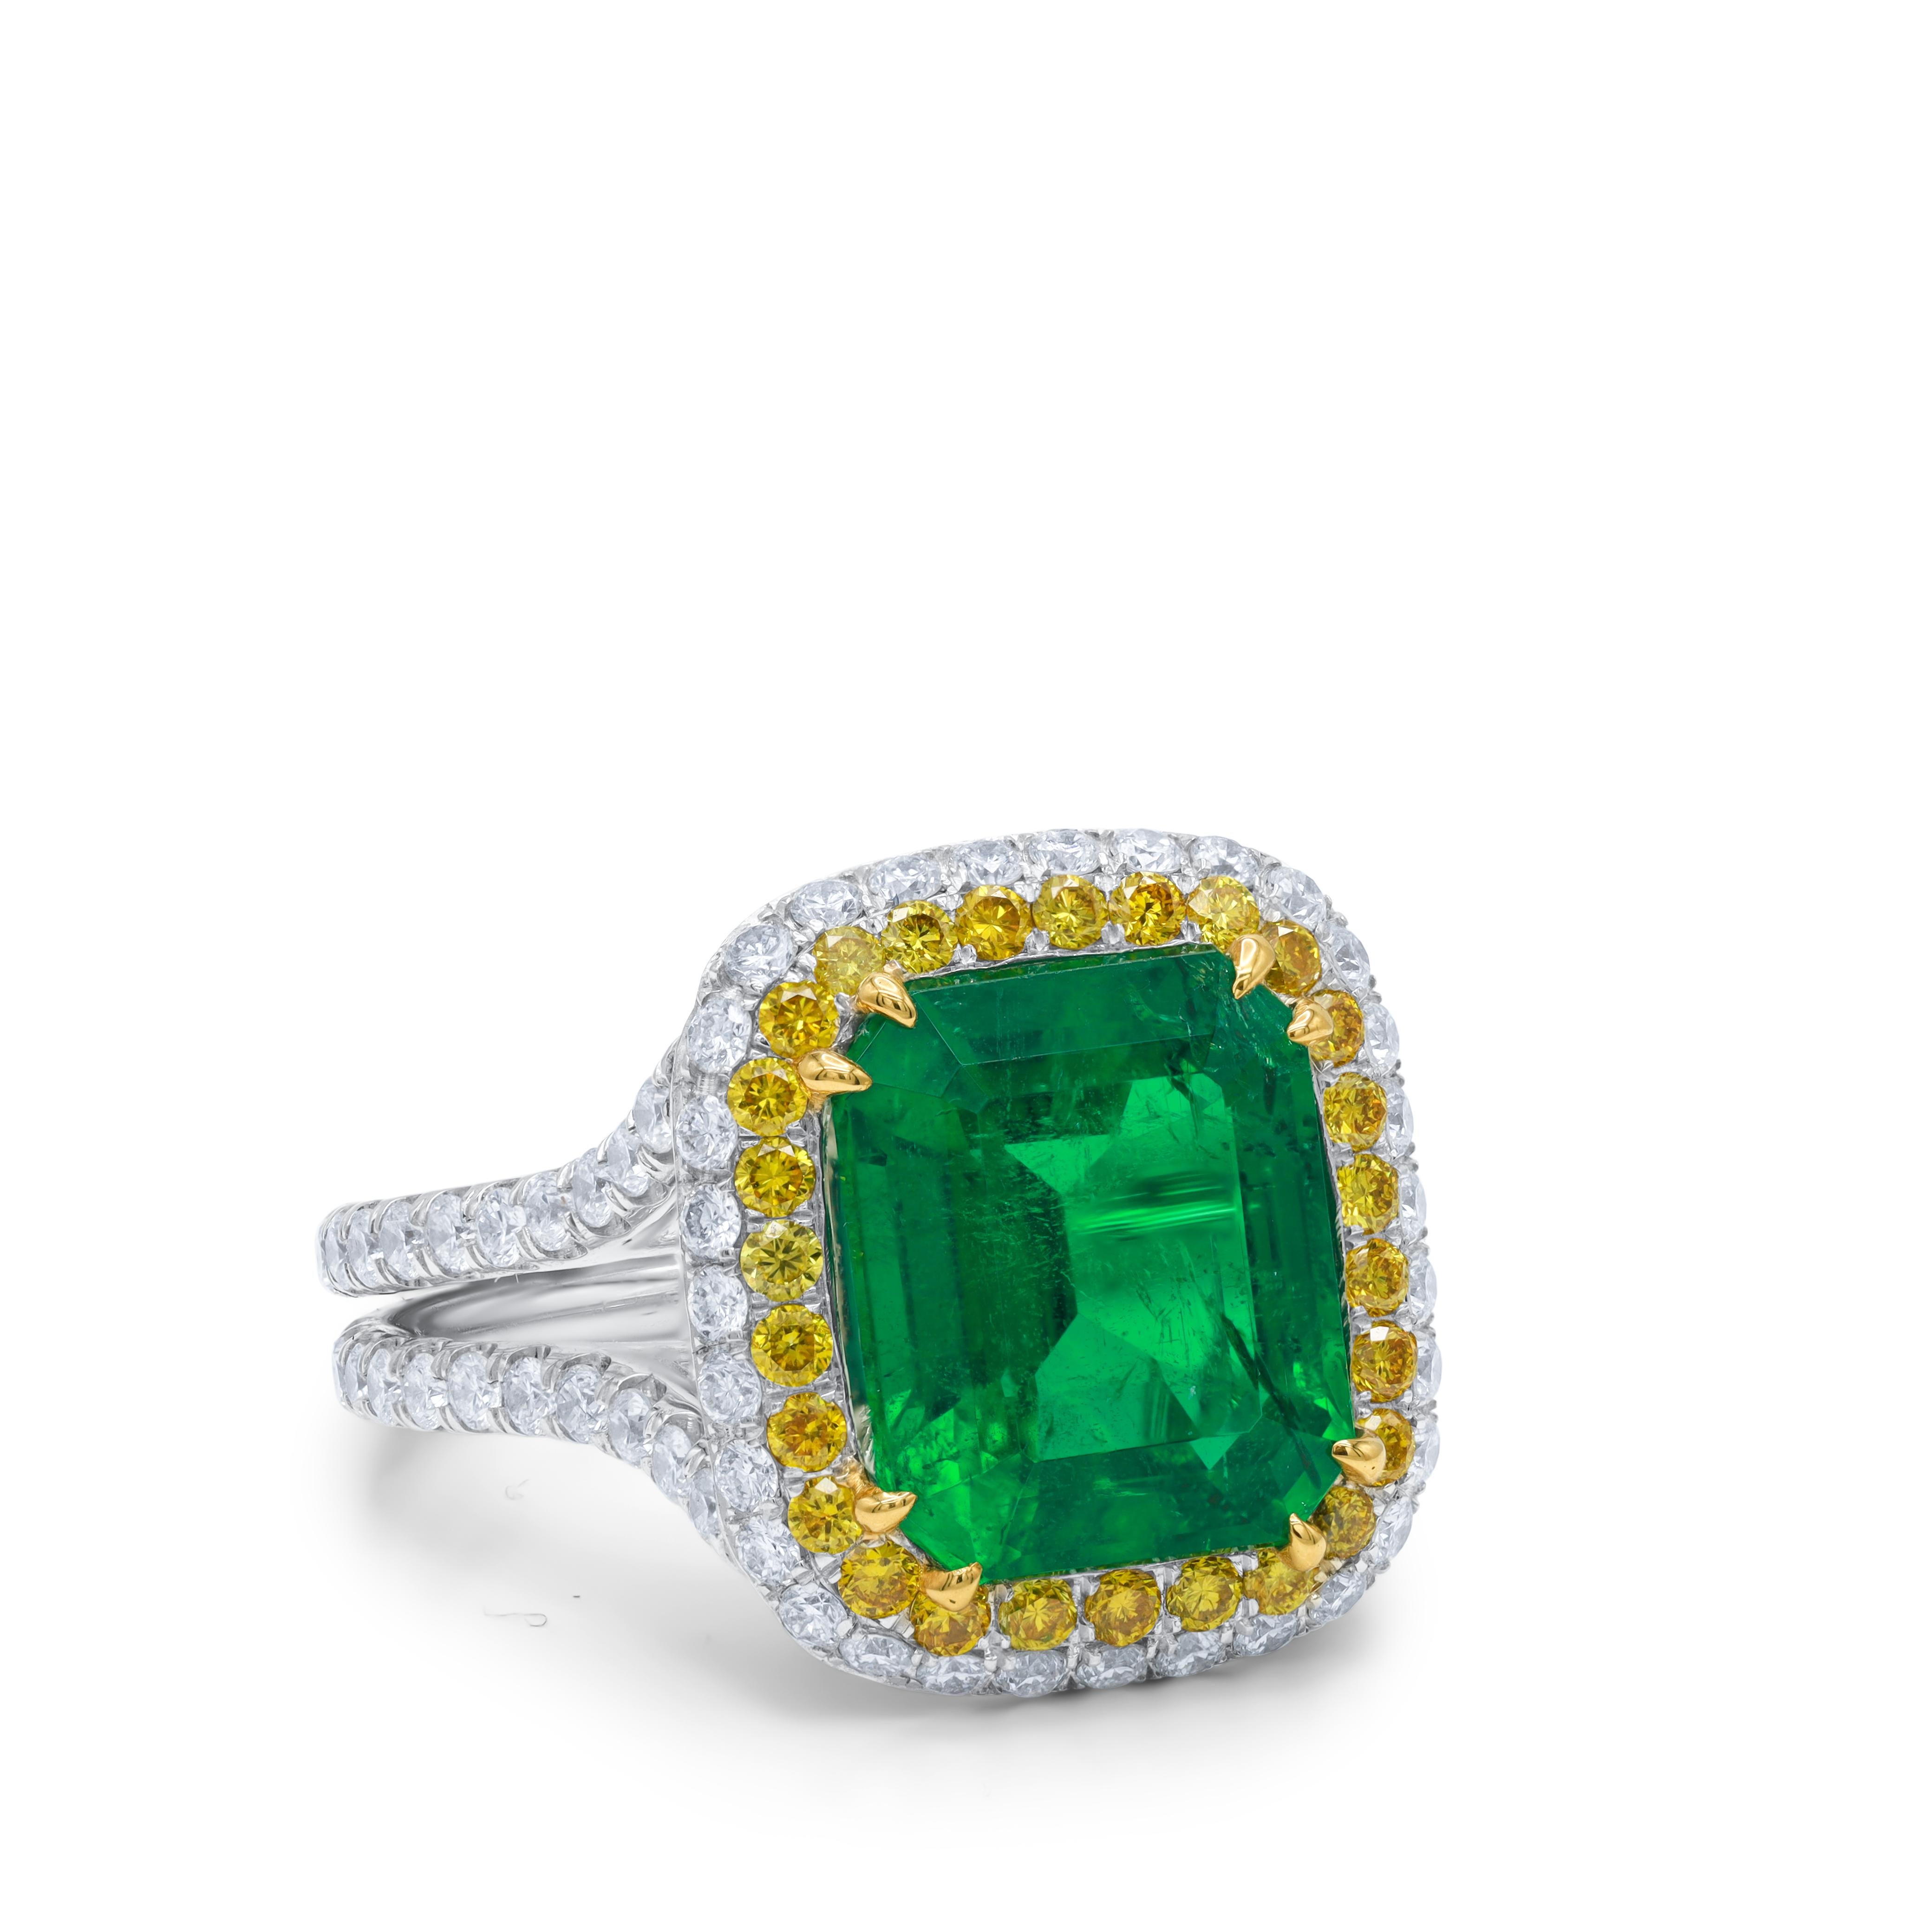 18kt white gold emerald diamond ring.  Featuring a 3.97 ct green emerald with 2.80 cts tw of yellow and white diamonds set in a split shank halo setting 